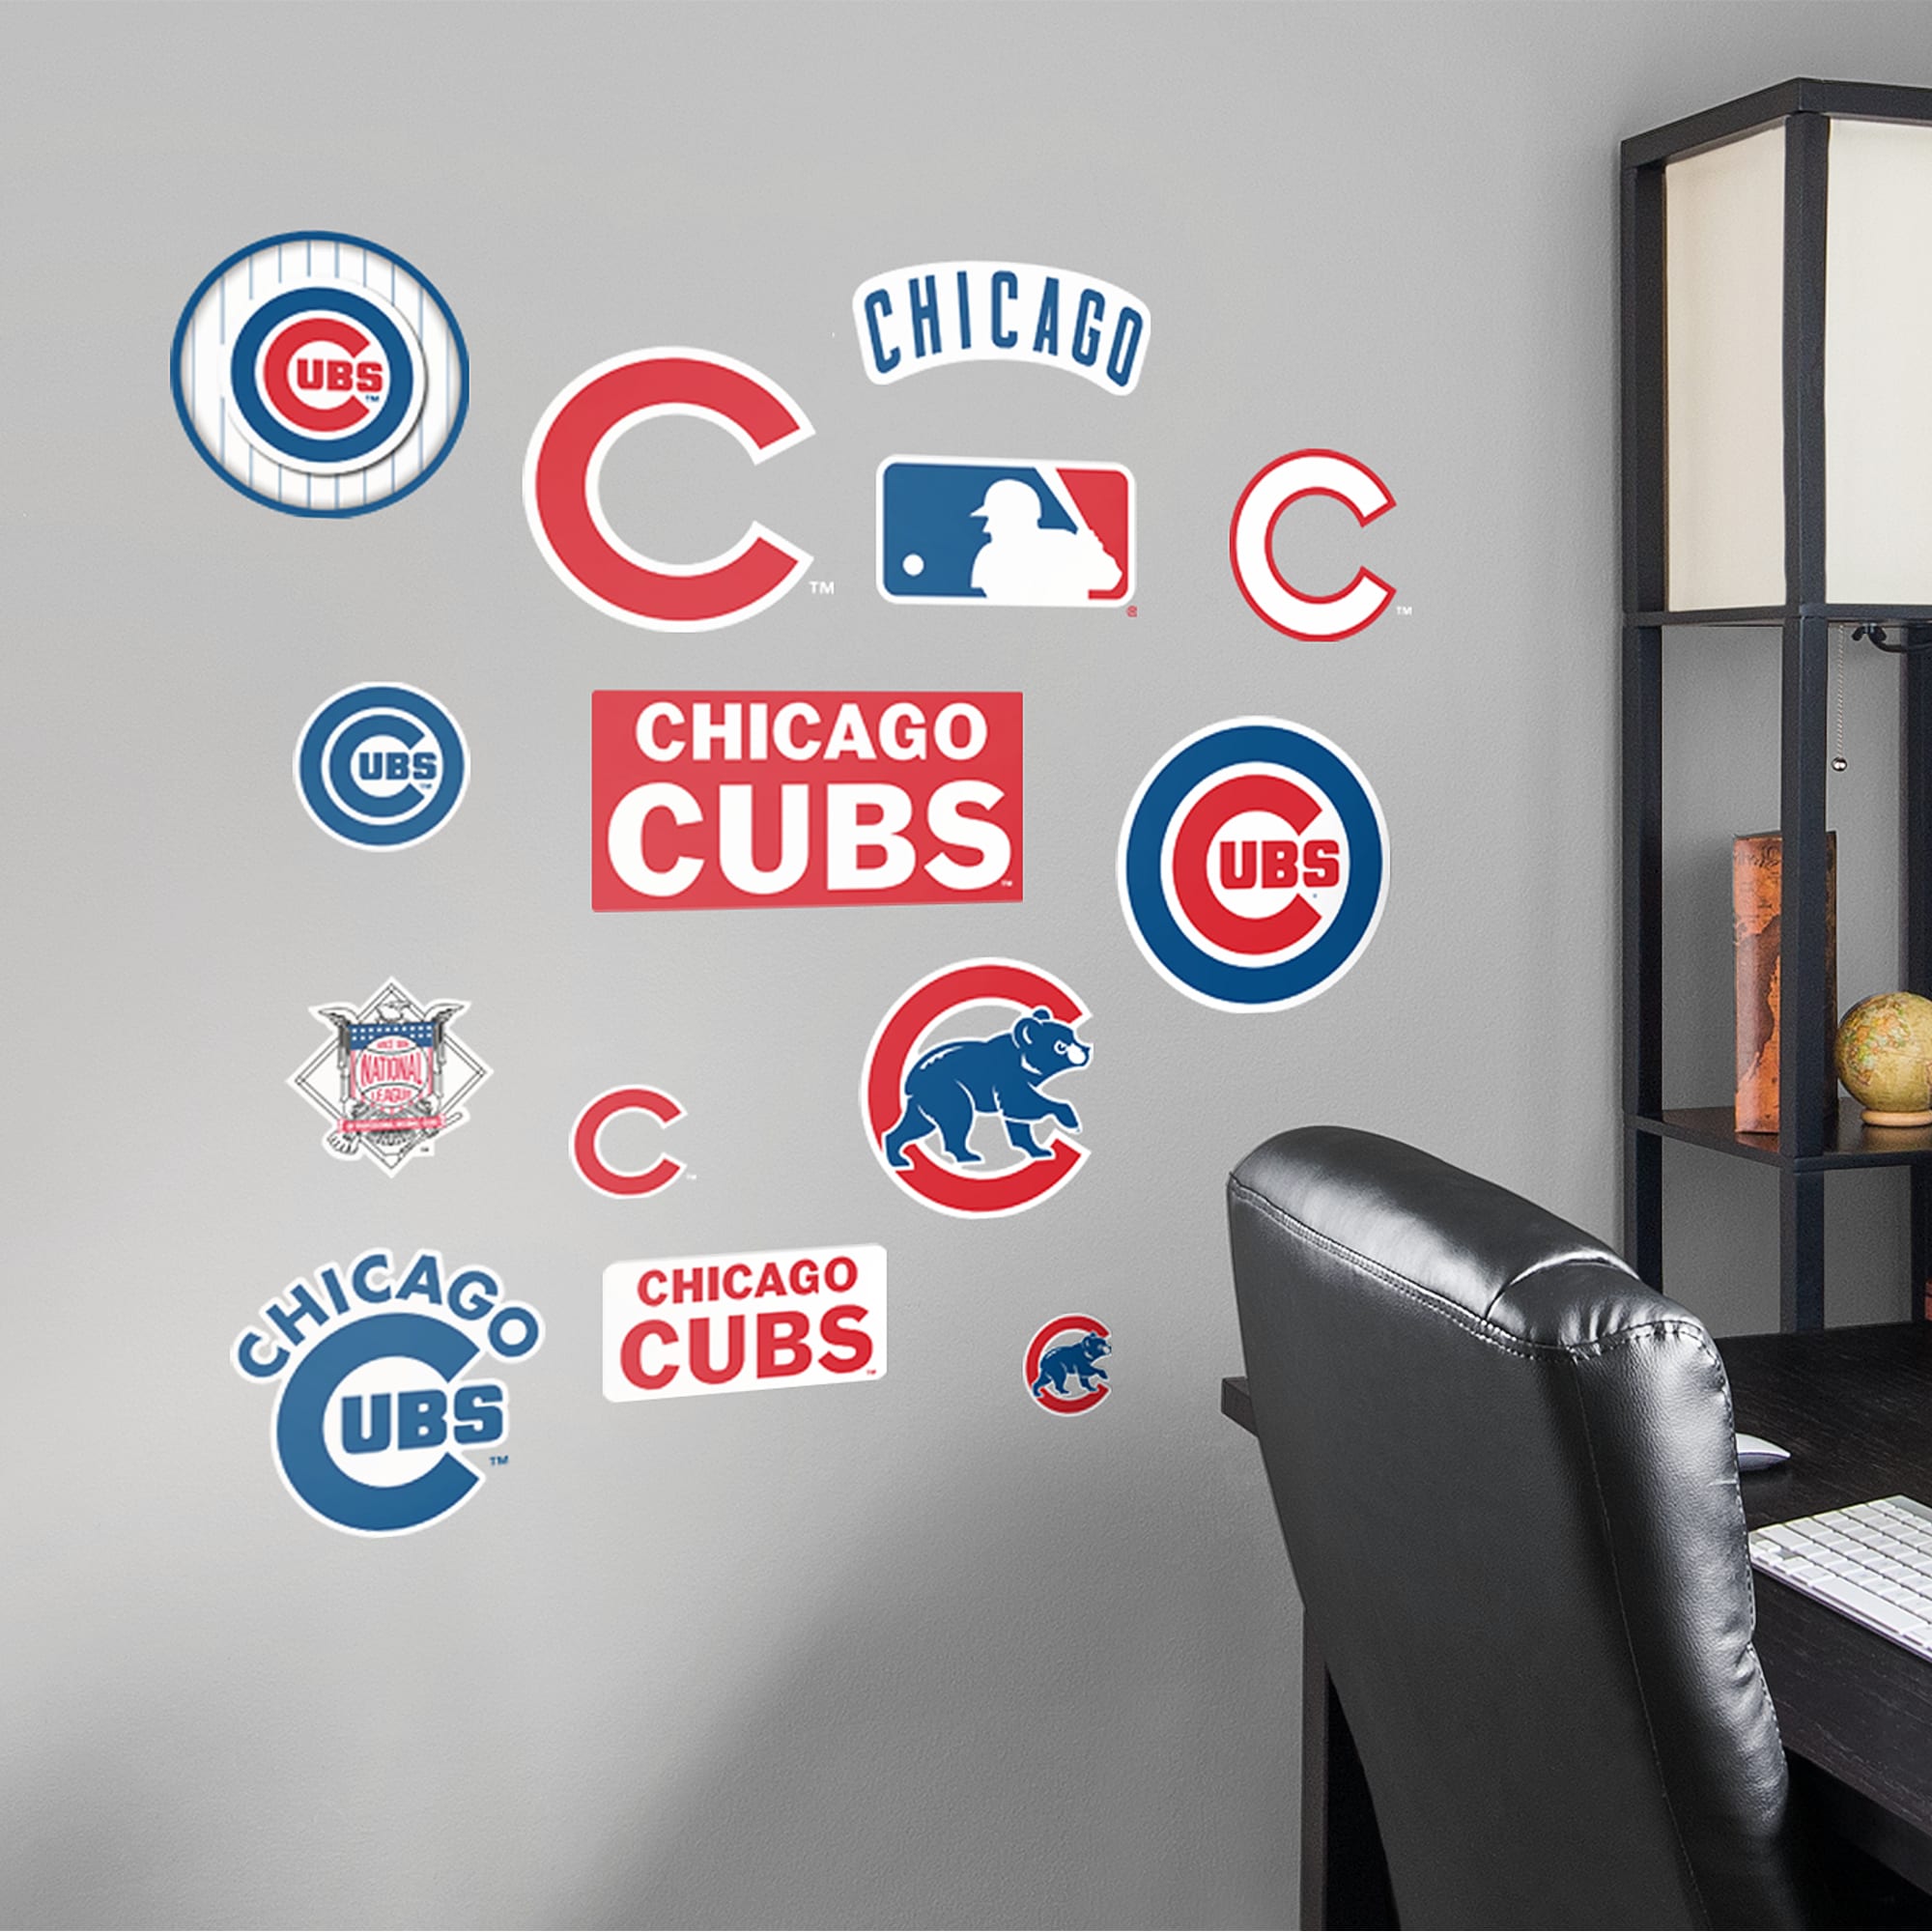 The best selling] Chicago Cubs MLB Floral Full Printing Classic